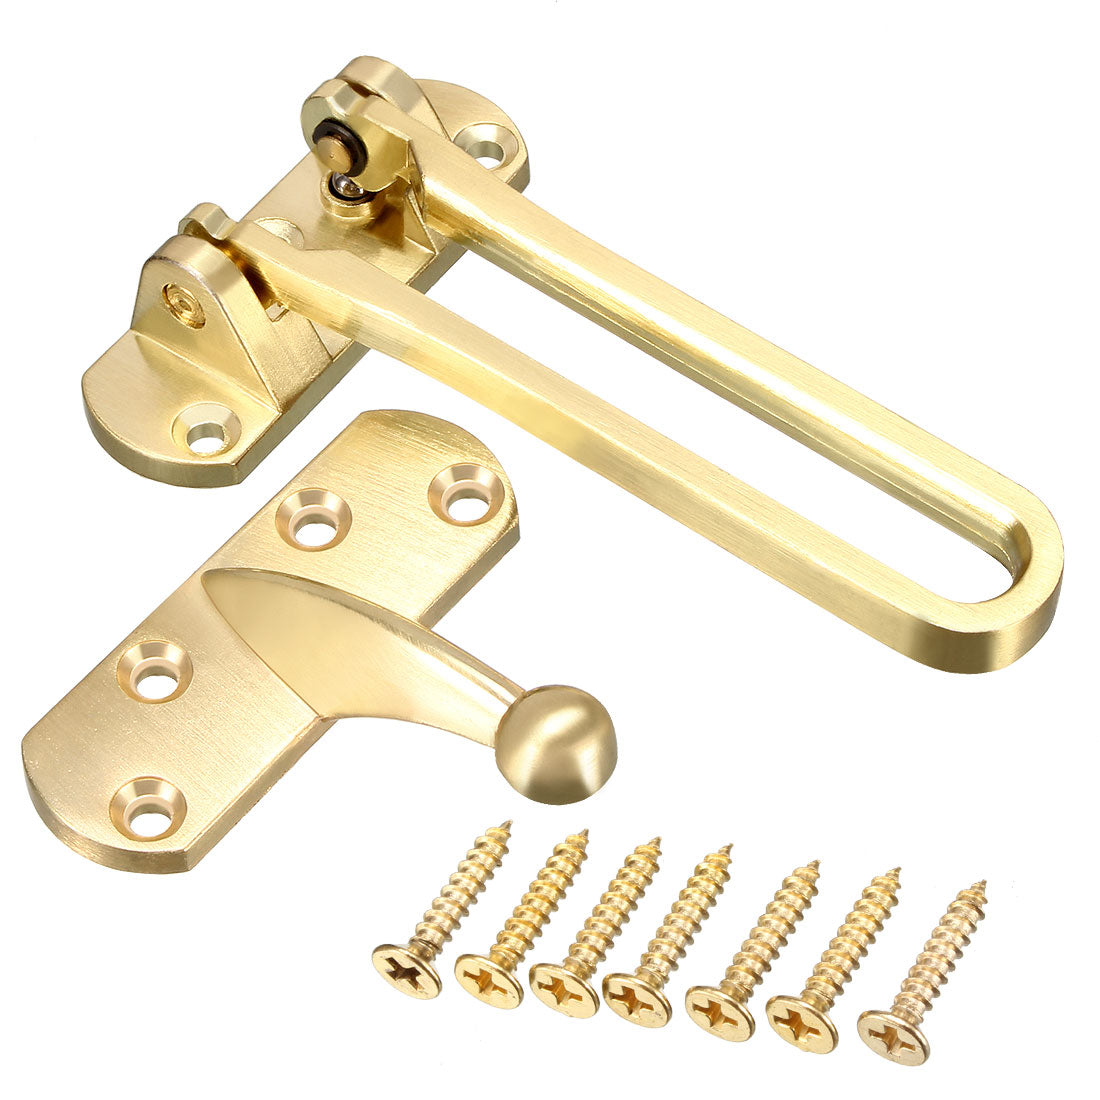 uxcell Uxcell Swing Bar Lock for Hinged Swing Secondary Security Lock for Door and Home Security, 4.13" Bar Length, Golden, Zinc Alloy, 1pc